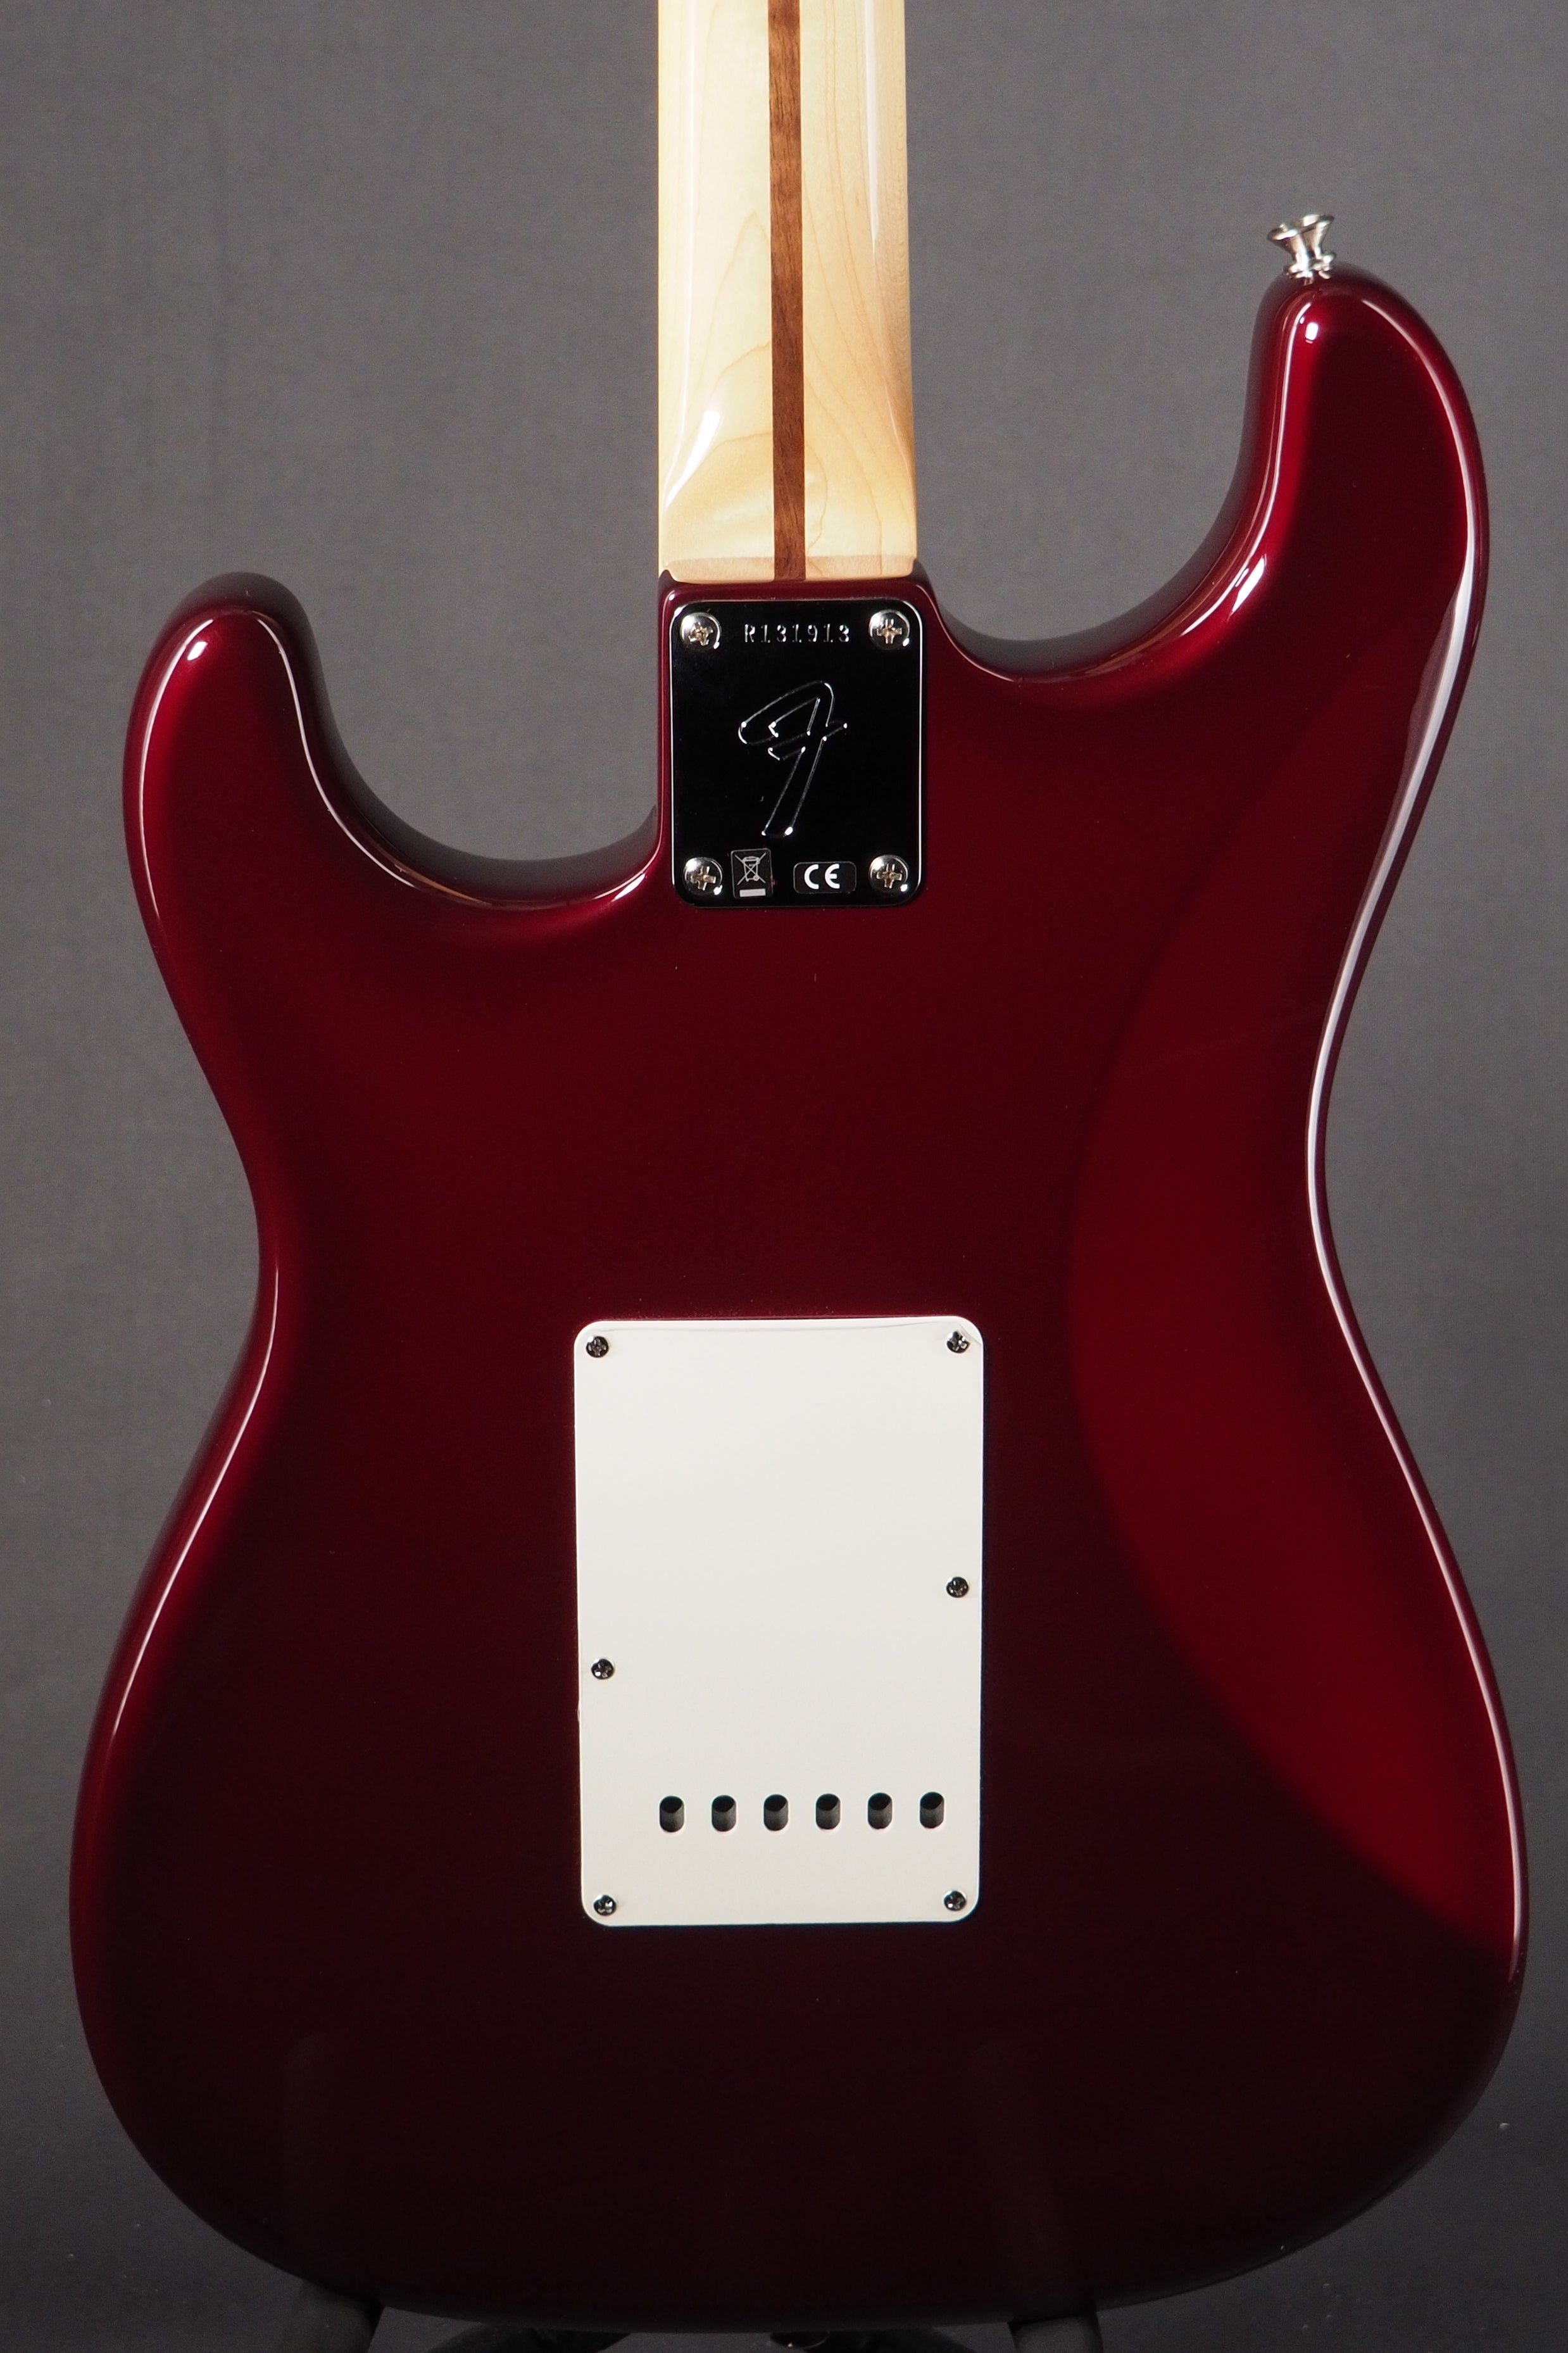 Robin Trower Signature Stratocaster - Metalic Wine Red